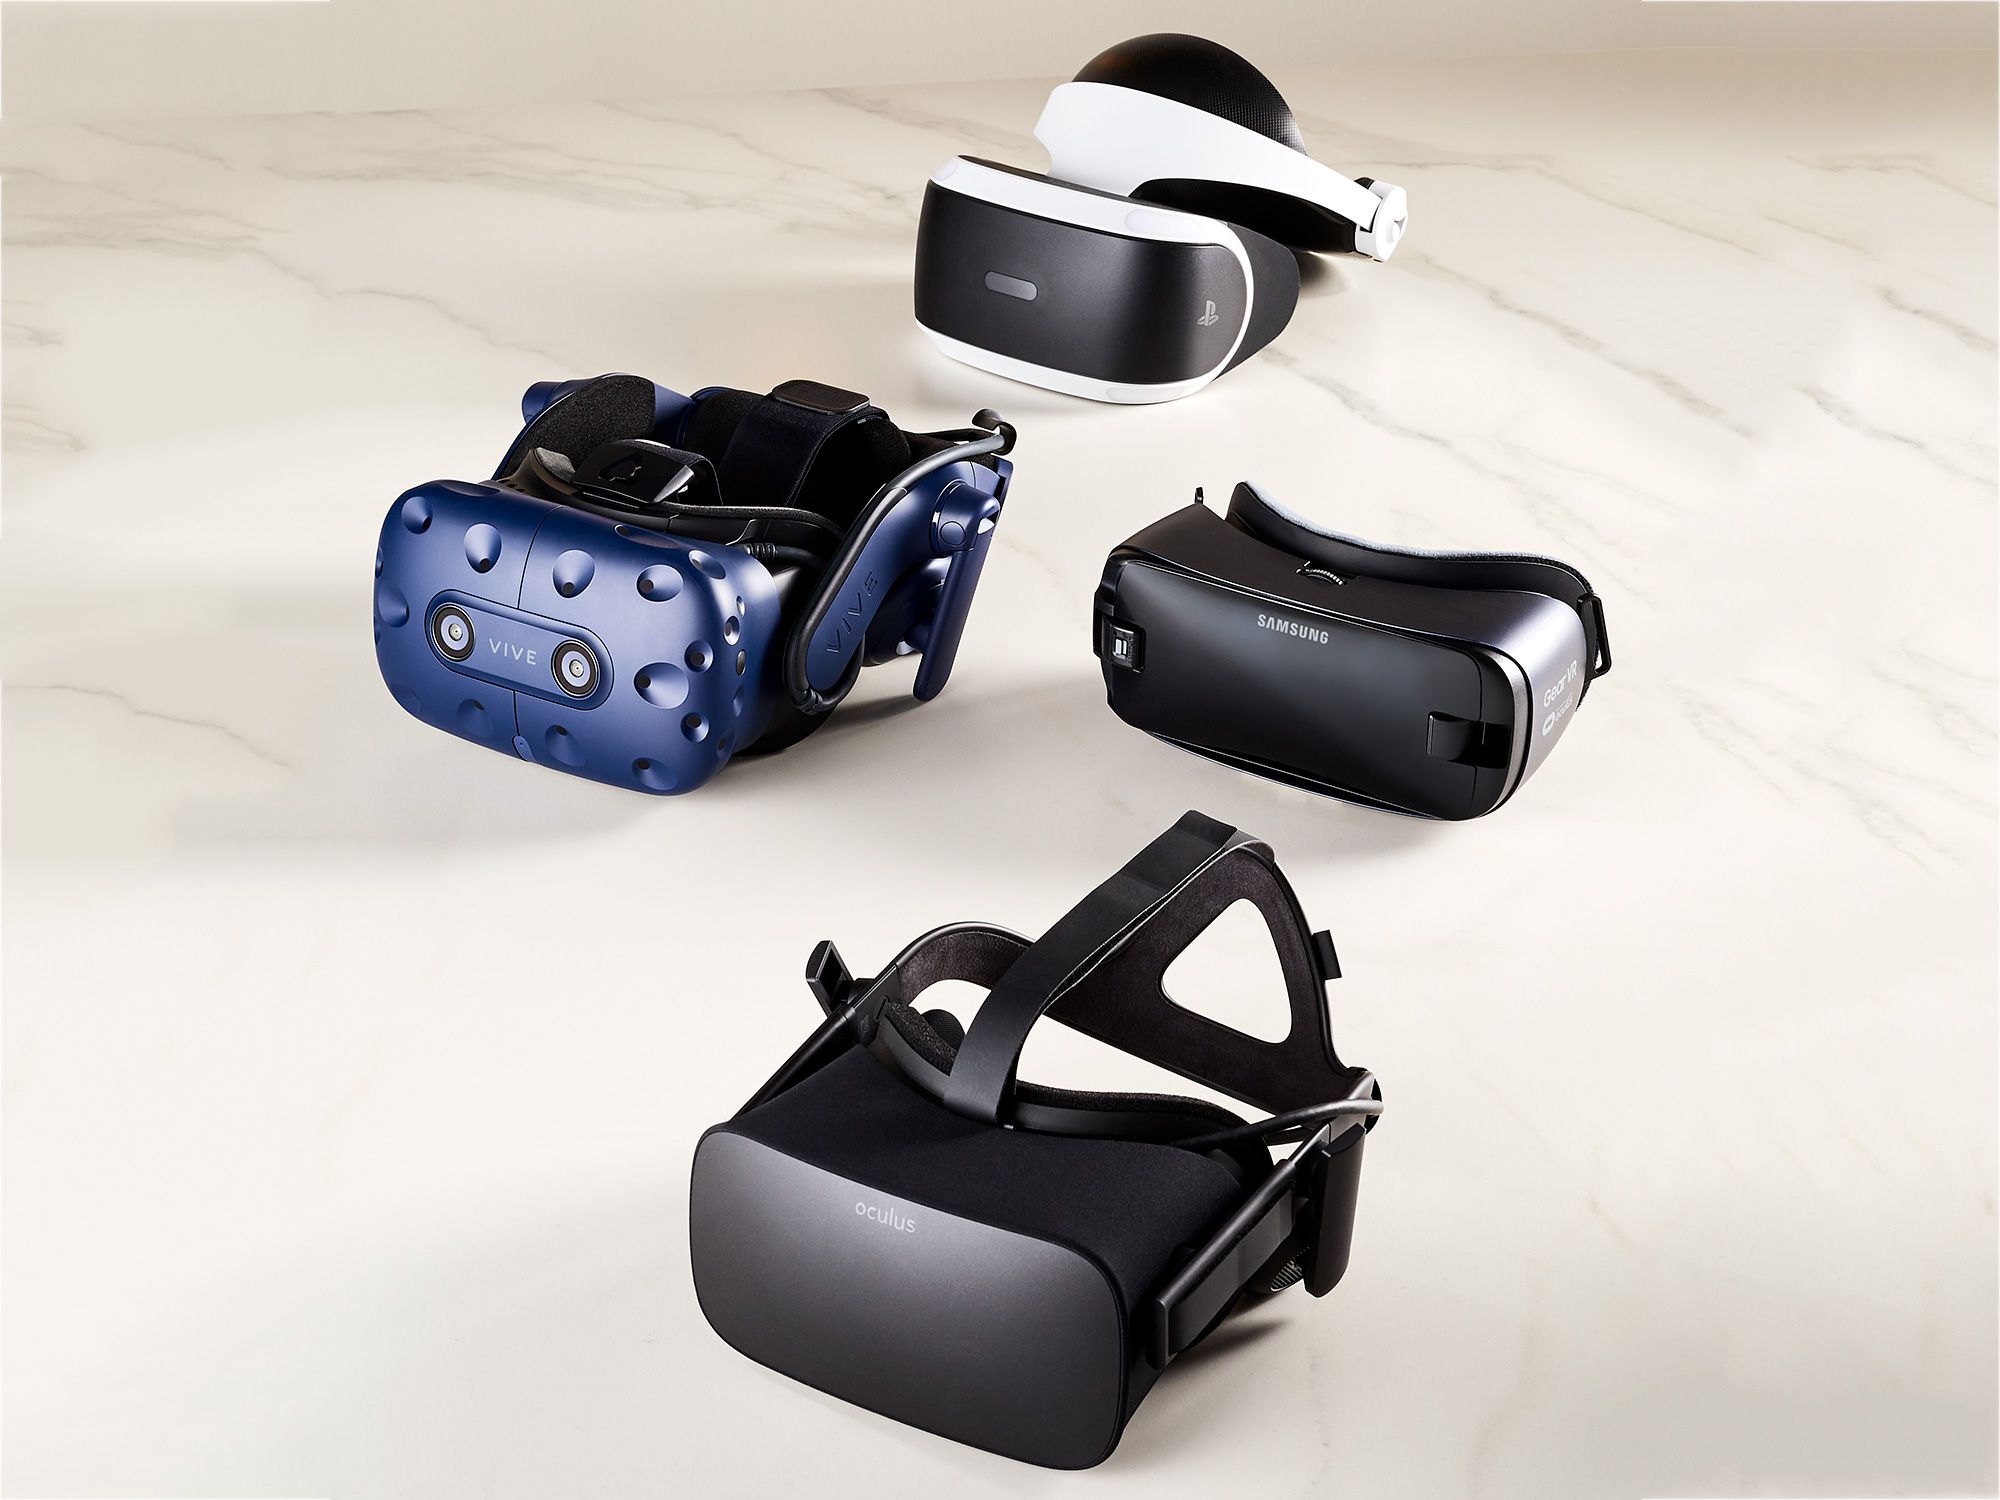 Virtual reality headsets by Samsung, Sony, HTC Vive and Oculus